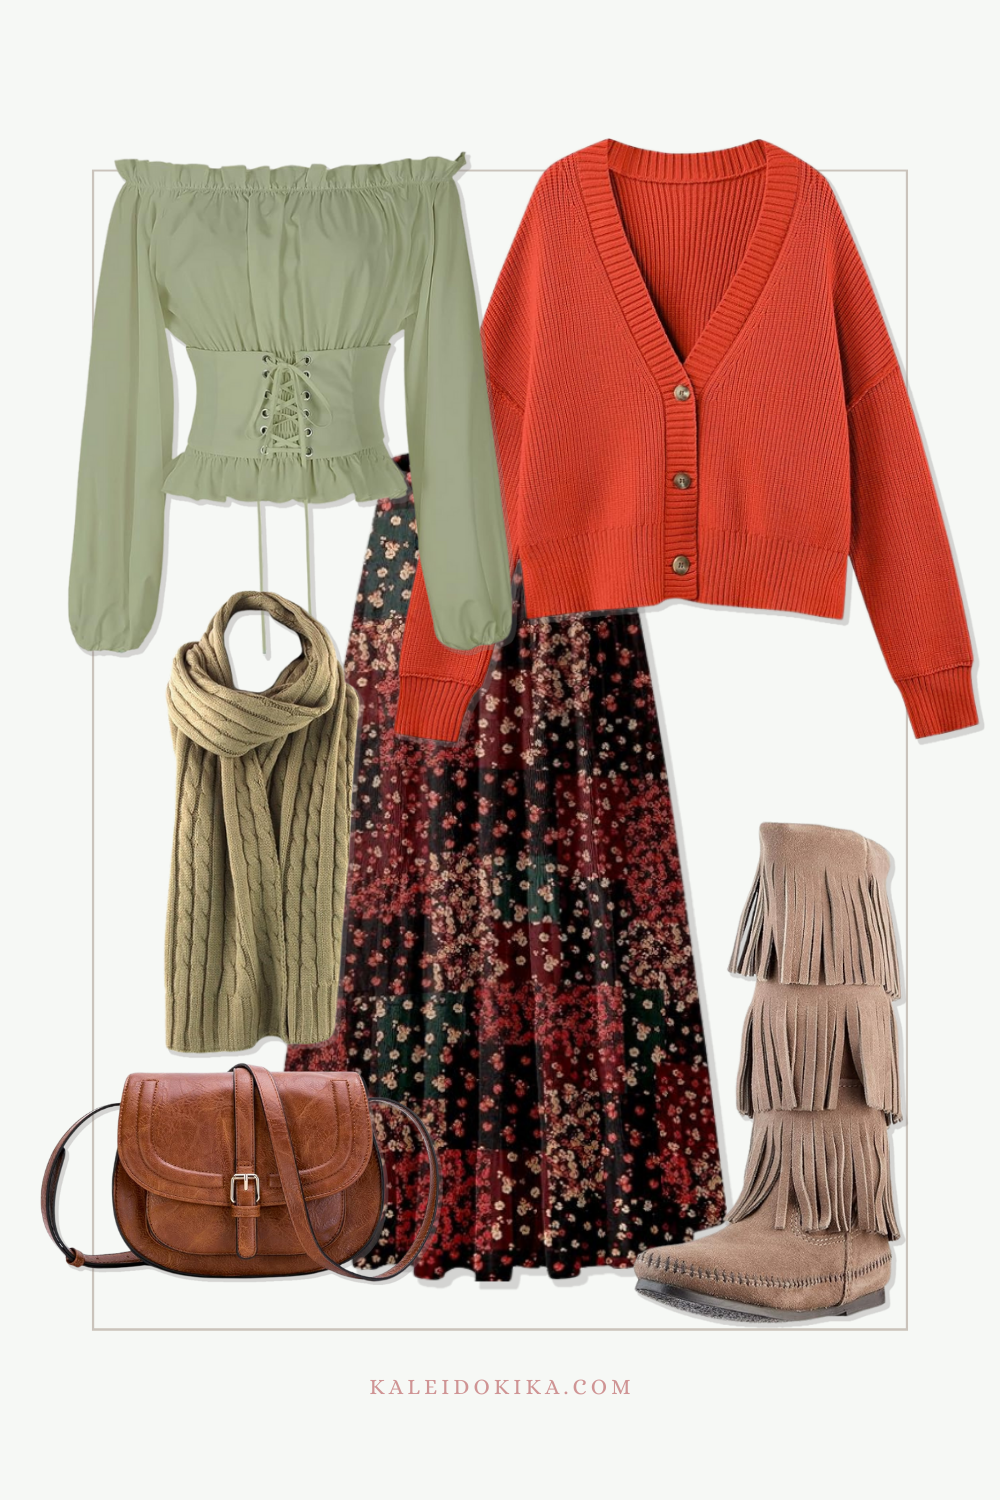 Boho inspired outfit with an off shoulder shirt, a warm kni cardigan, a cute maxi skirt and accessories